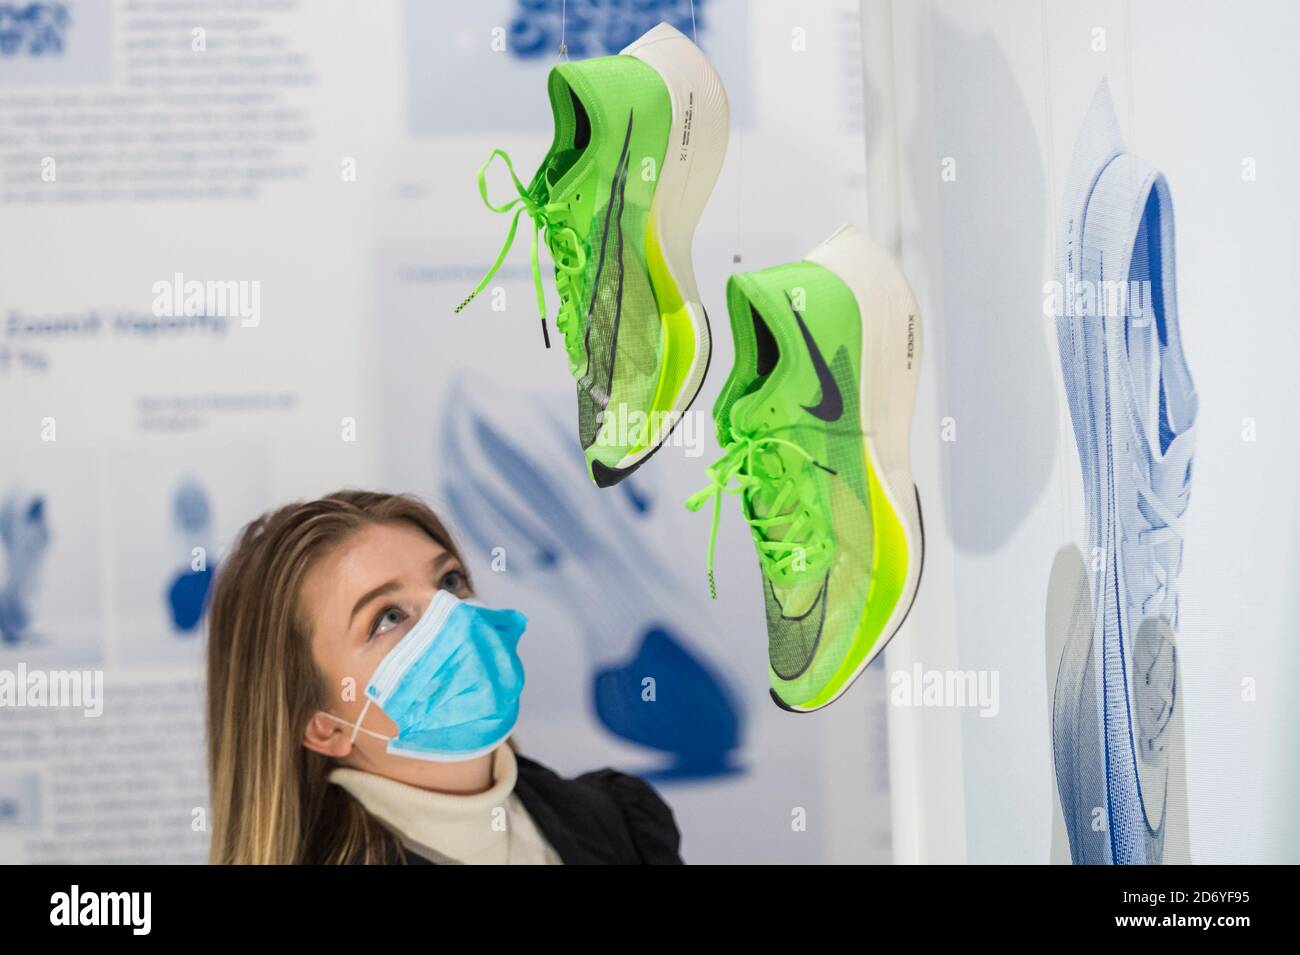 Nike Award High Resolution Stock Photography and Images - Alamy